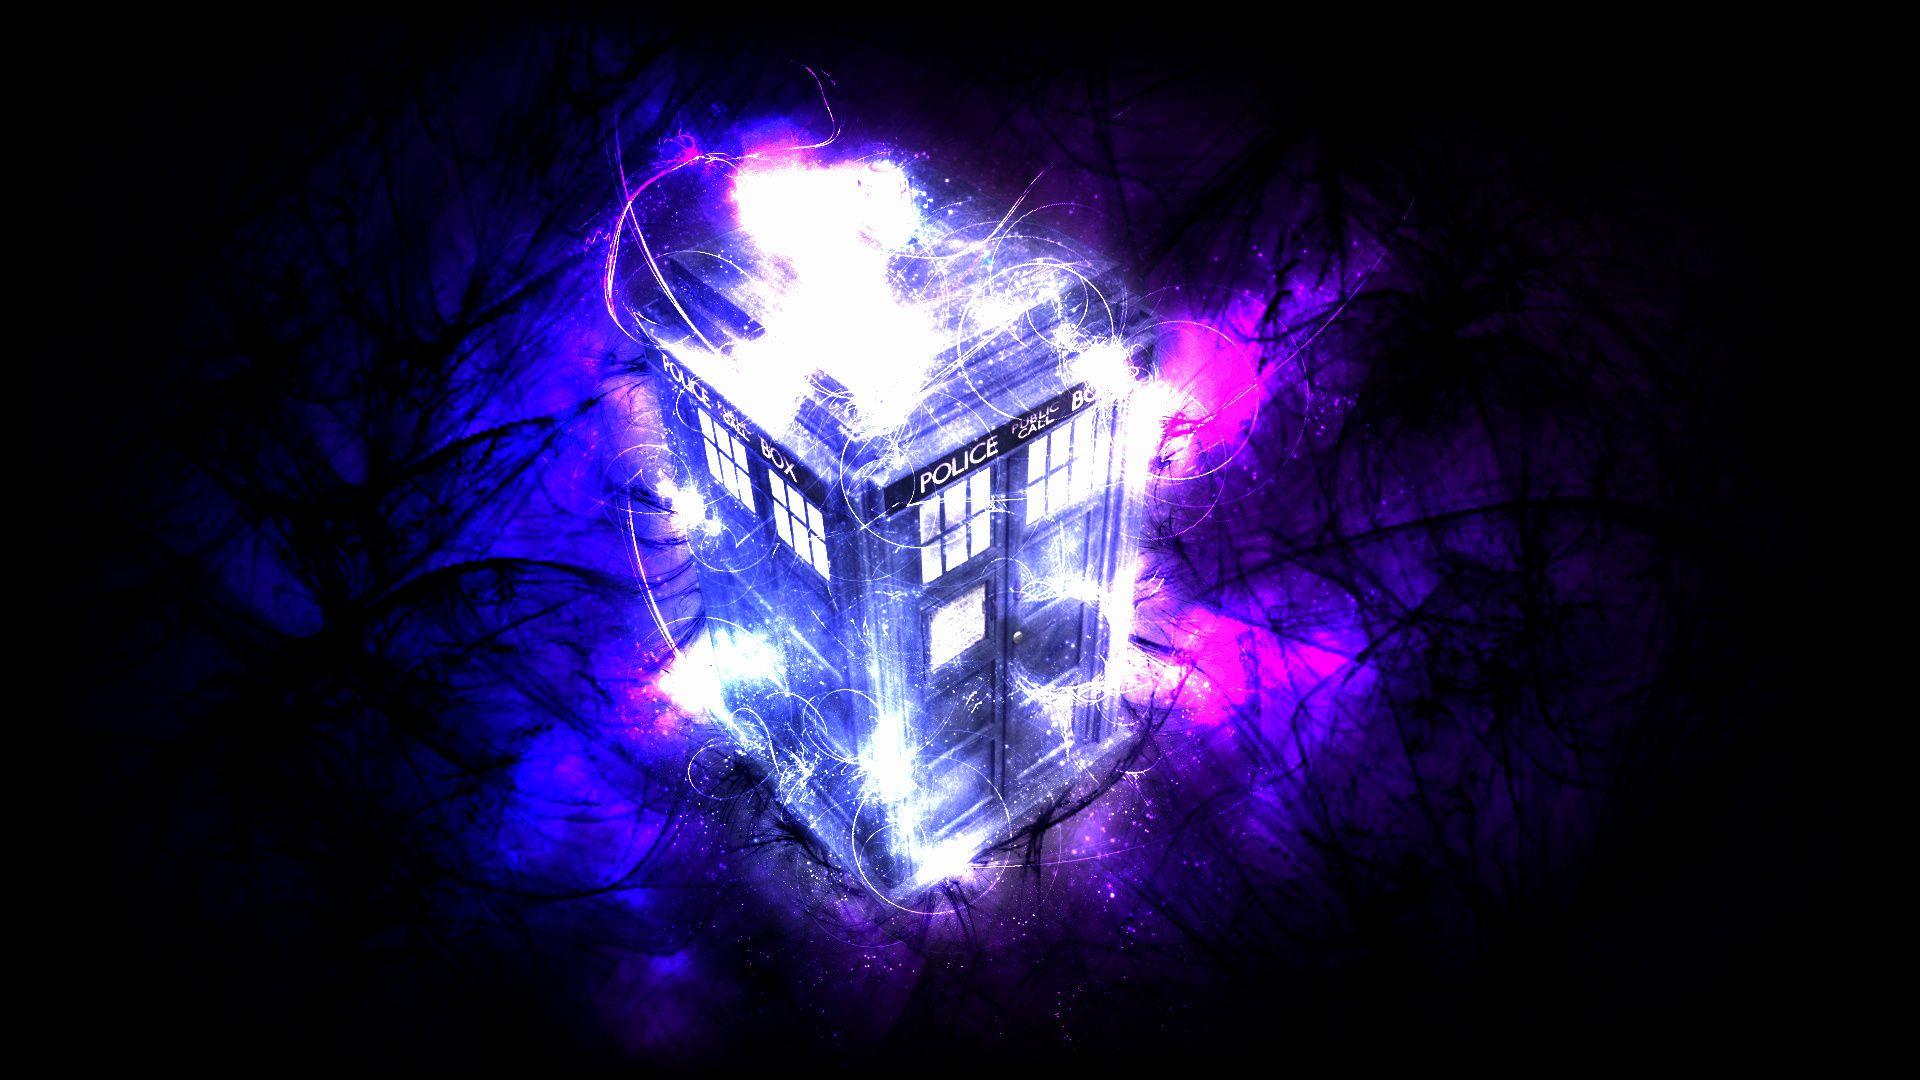 Tardis Wallpaper Luxury Free Doctor who Wallpaper for iPhone